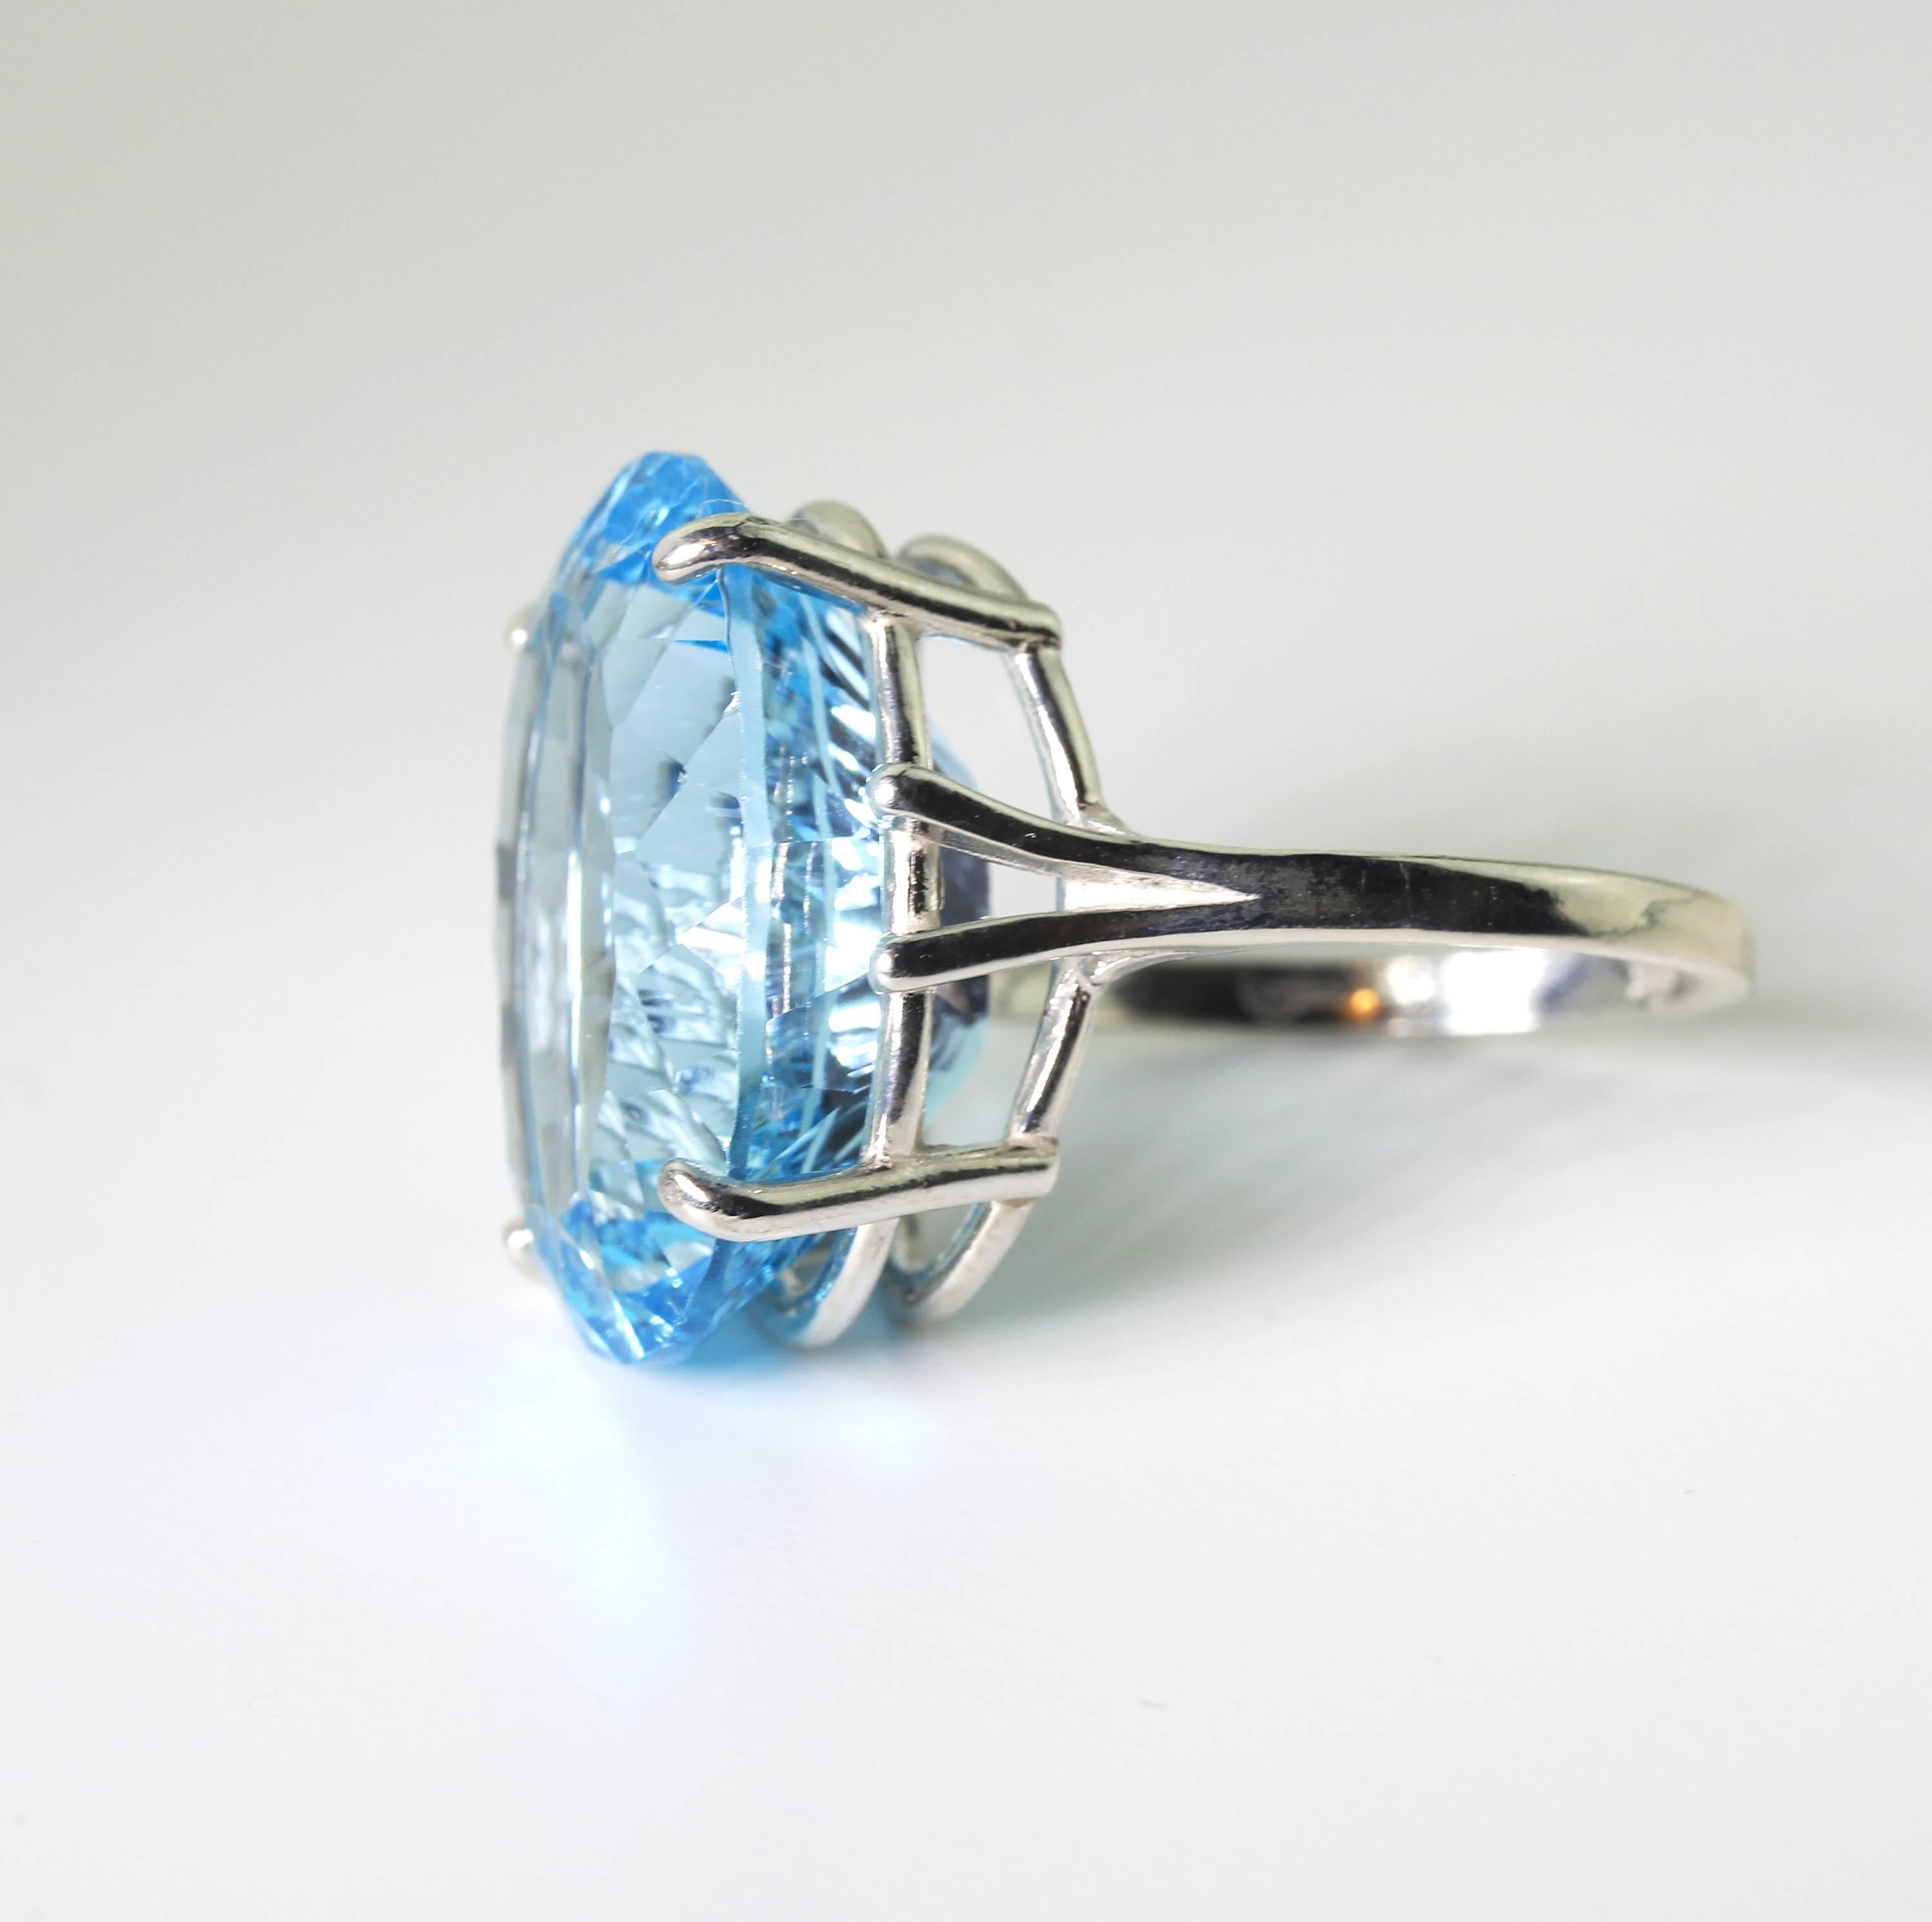 Wowser of a beautiful amazingly cut 22.30 carat Brilliant Blue Topaz set in Sterling Silver ring.  The ring is a size 7 (sizable) and the cut is such that the gemstone glitters from all directions.  There are no visible inclusions.